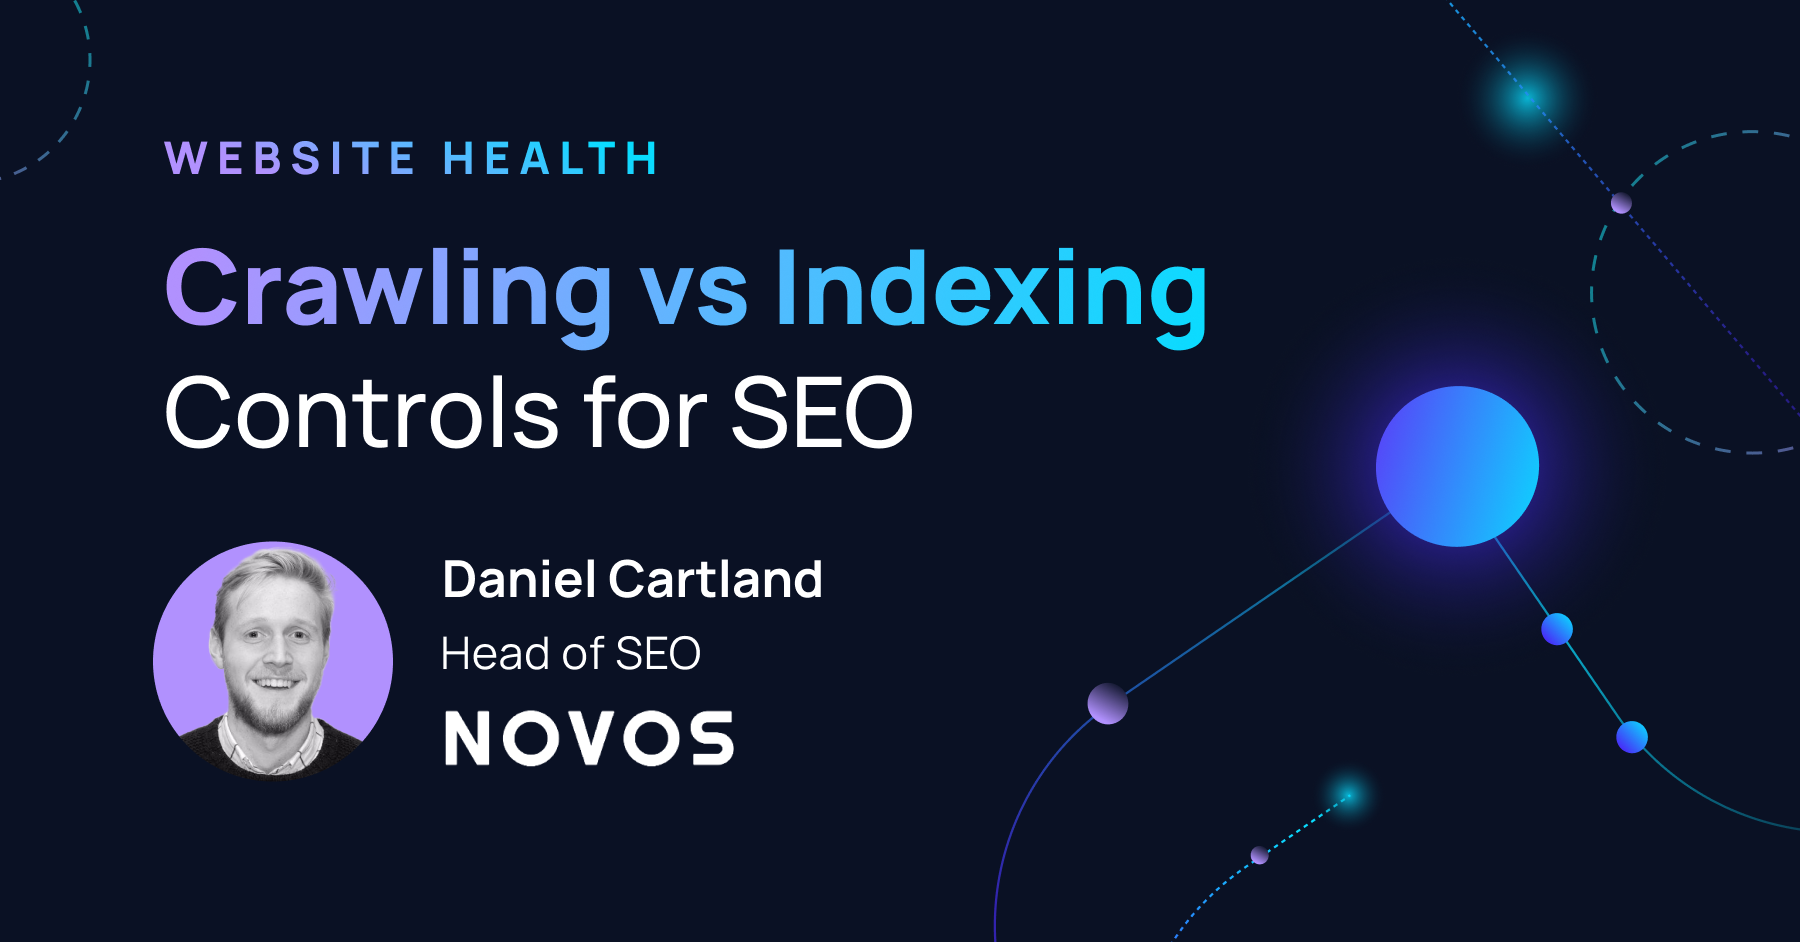 When should you use crawling vs indexing controls for SEO?